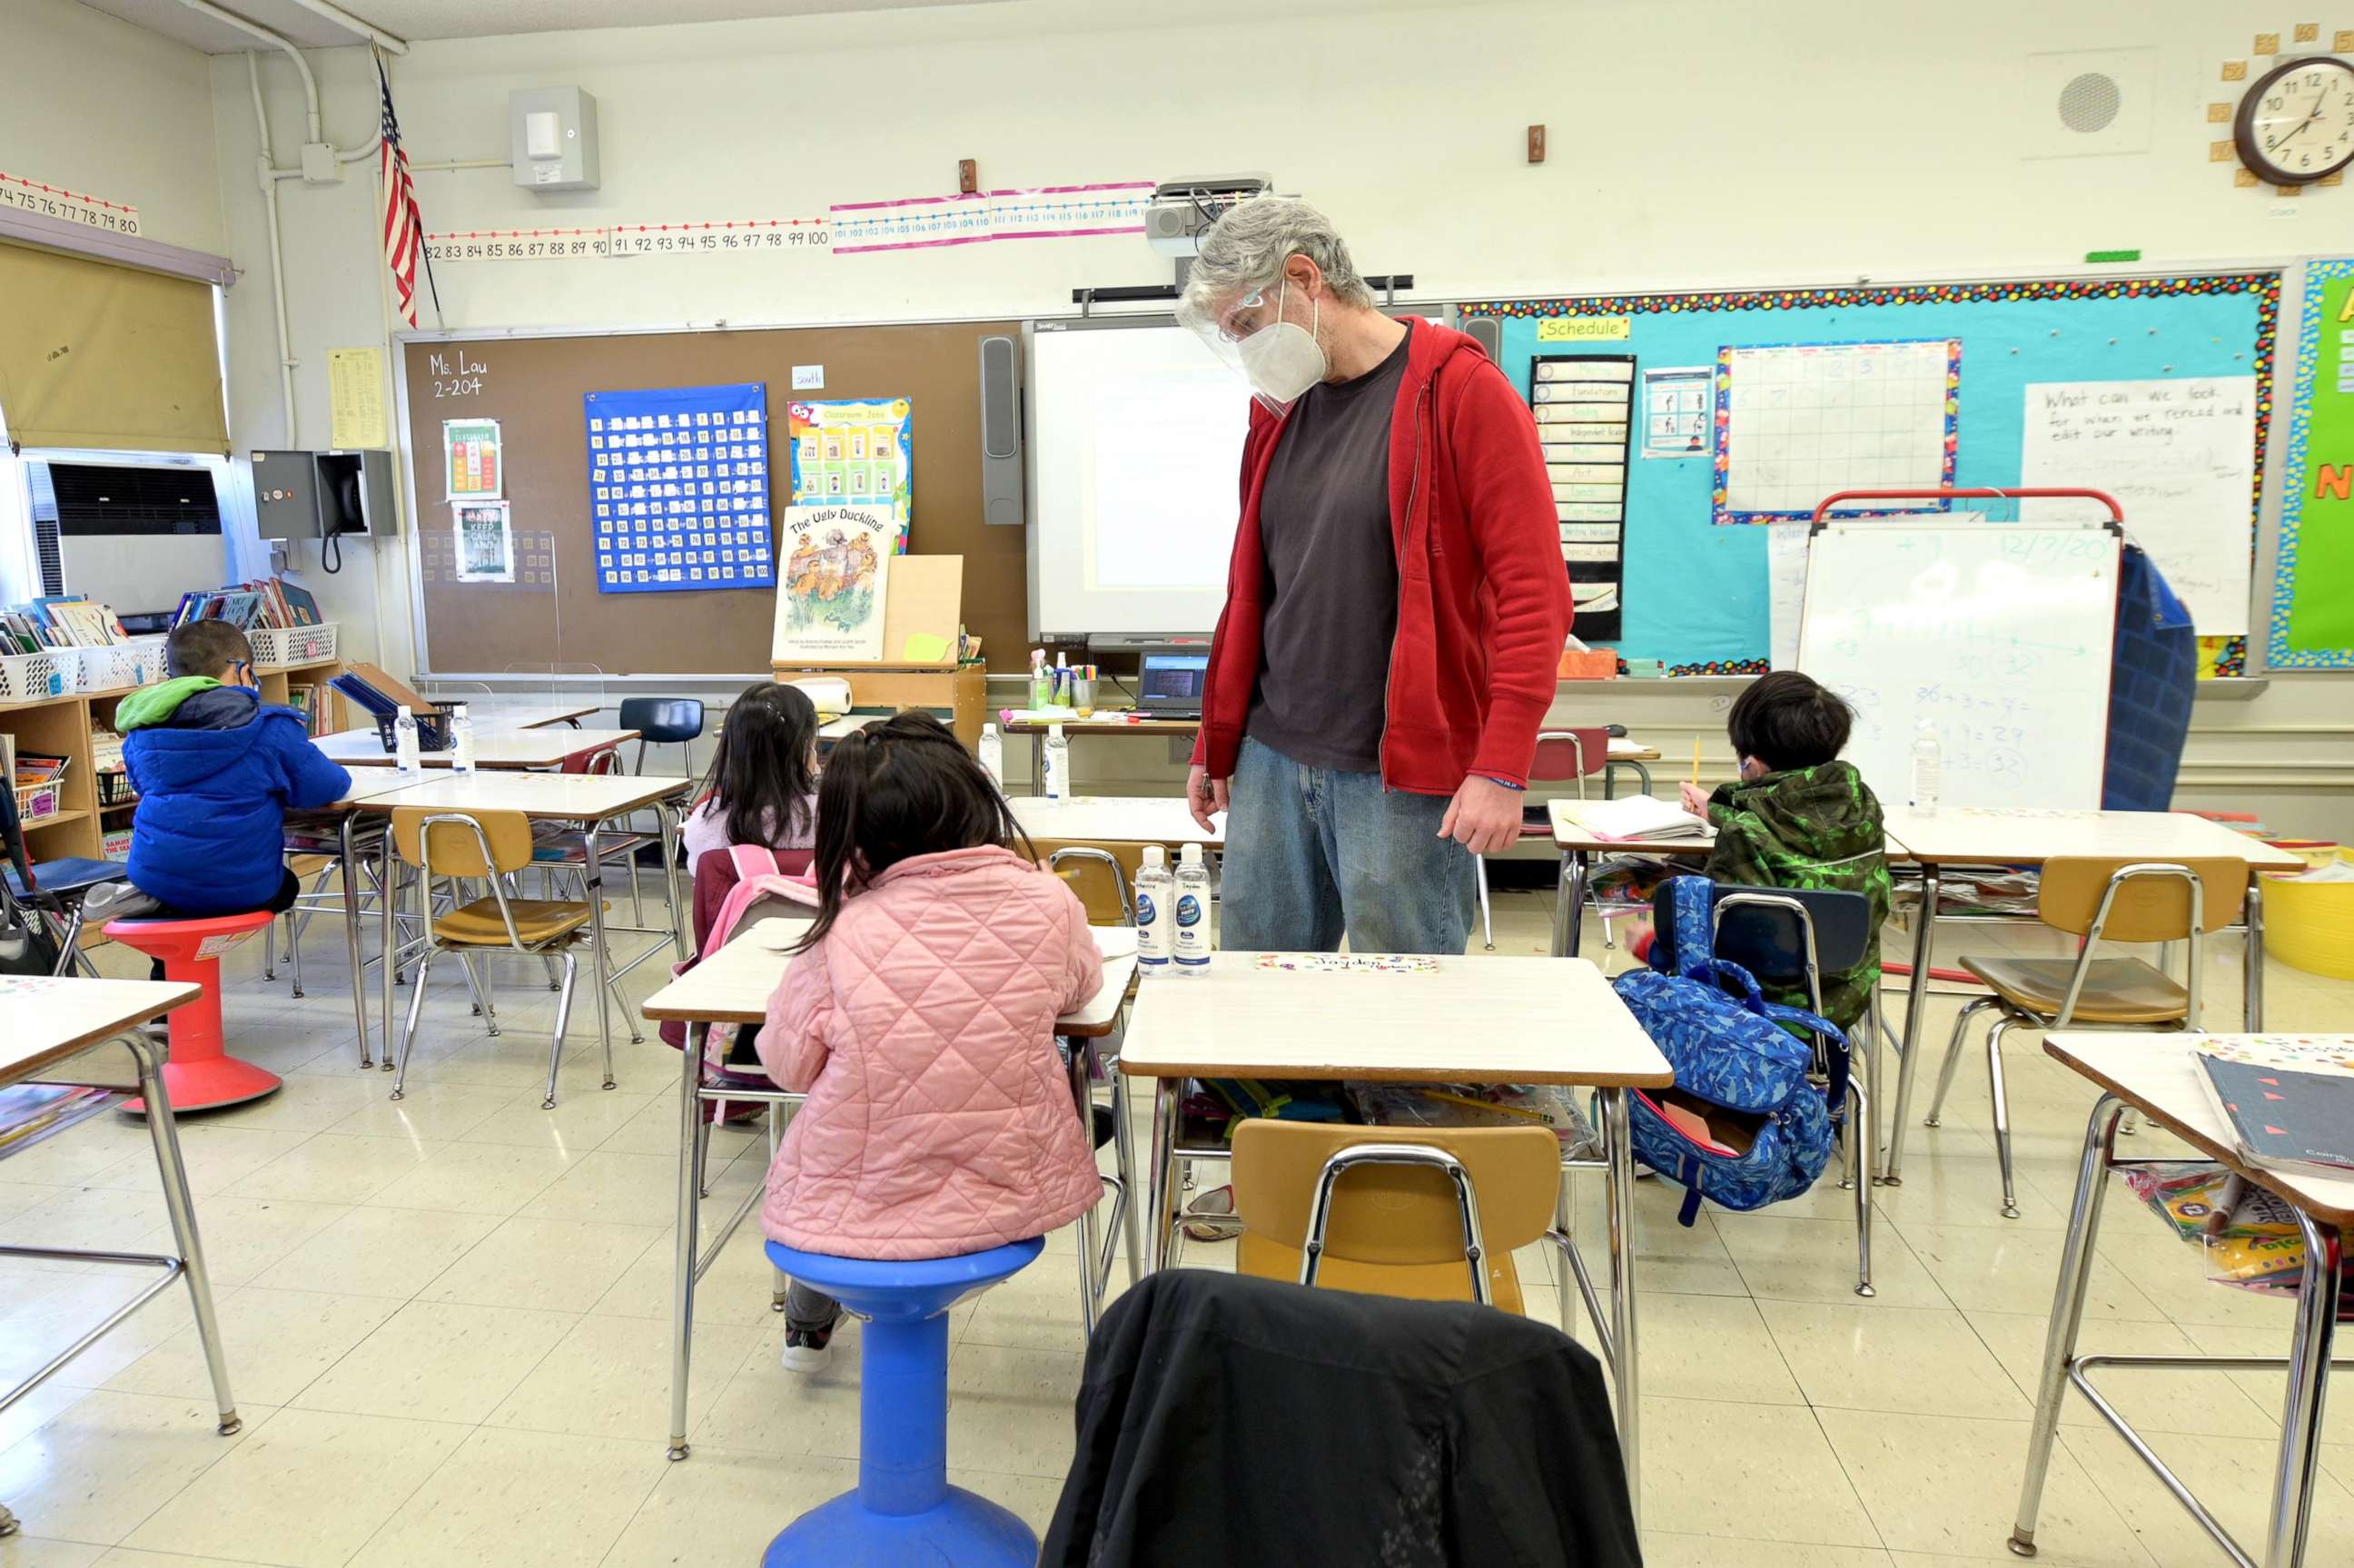 PHOTO: A teacher speaks to students at Yung Wing School P.S. 124 in New York on Dec. 7, 2020.